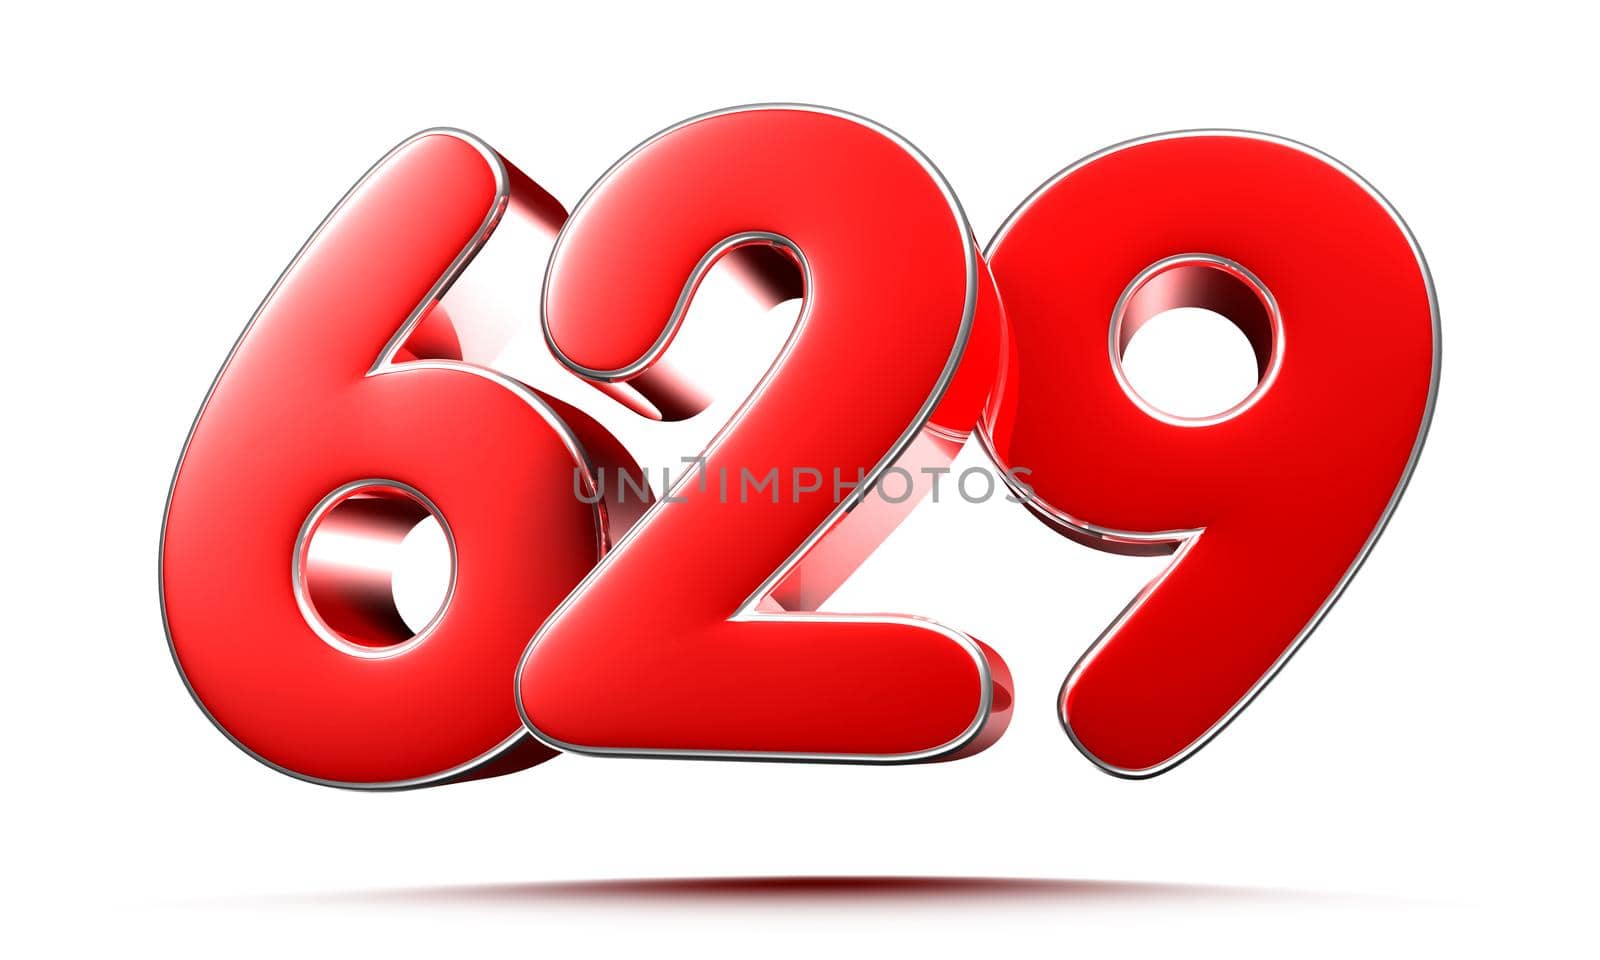 Rounded red numbers 629 on white background 3D illustration with clipping path by thitimontoyai